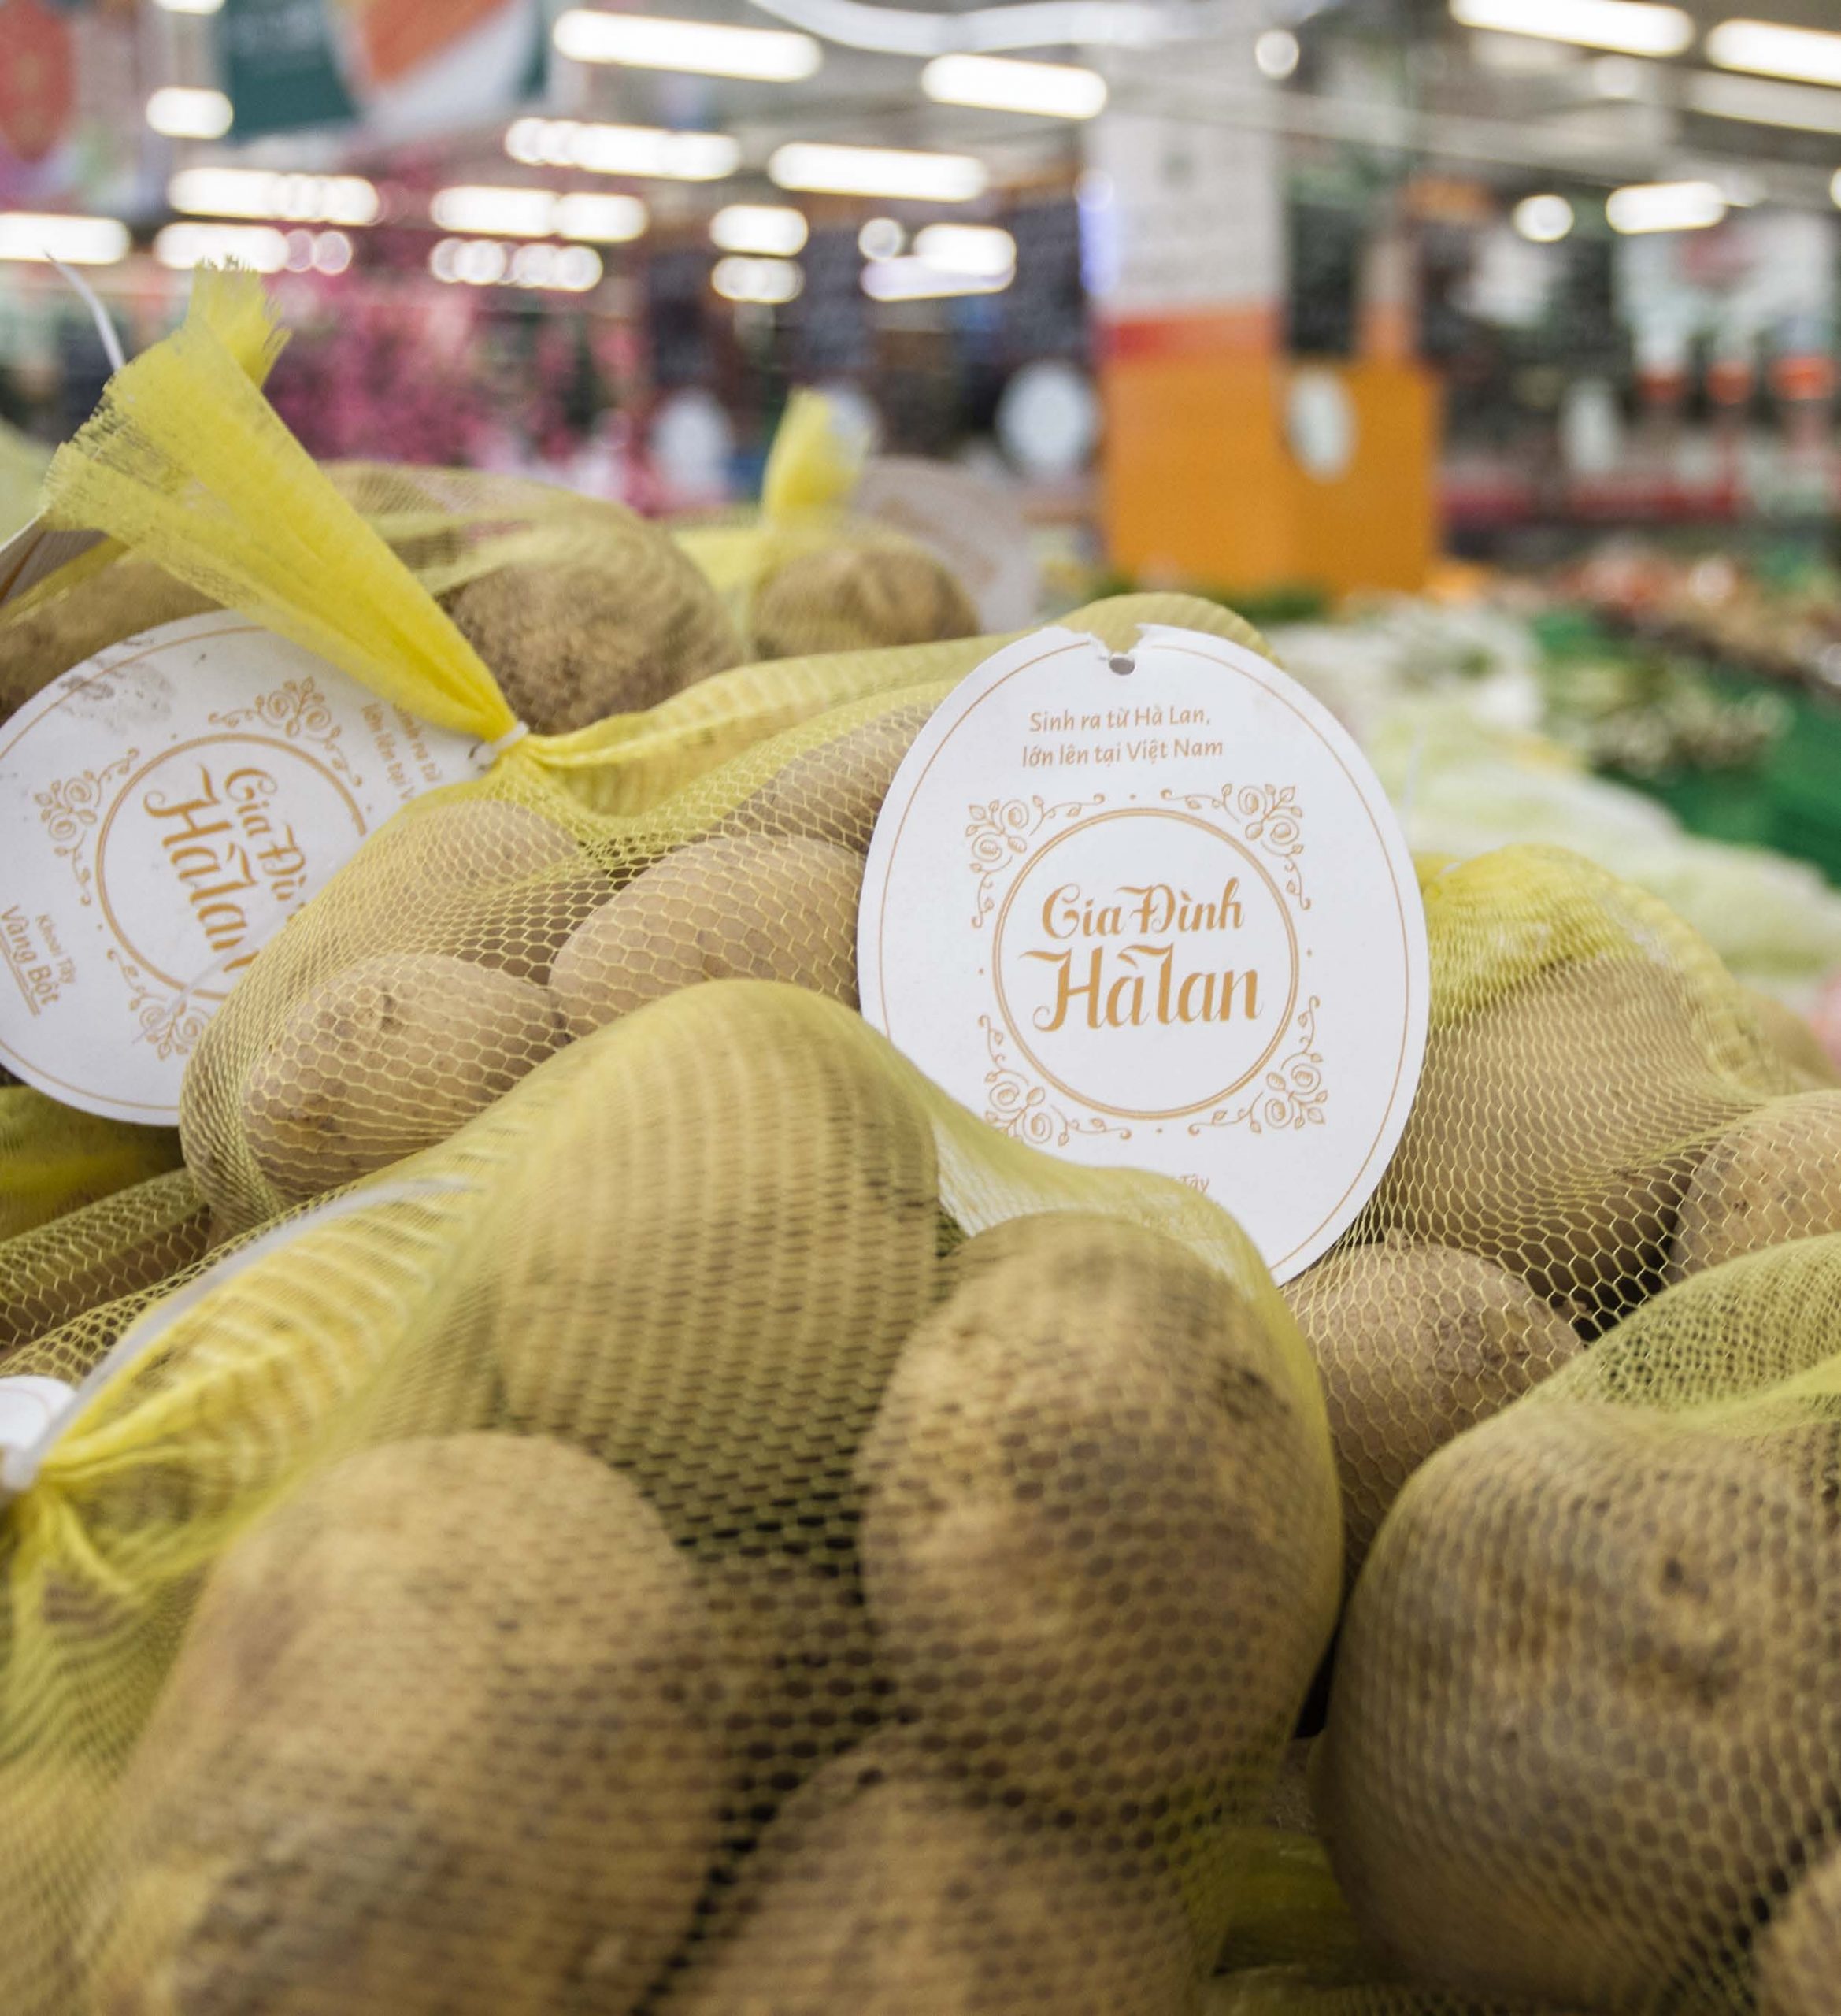 Gia Đình Hà Lan potato brand launched in major supermarket, wholesale markets and canteens in Vietnam.